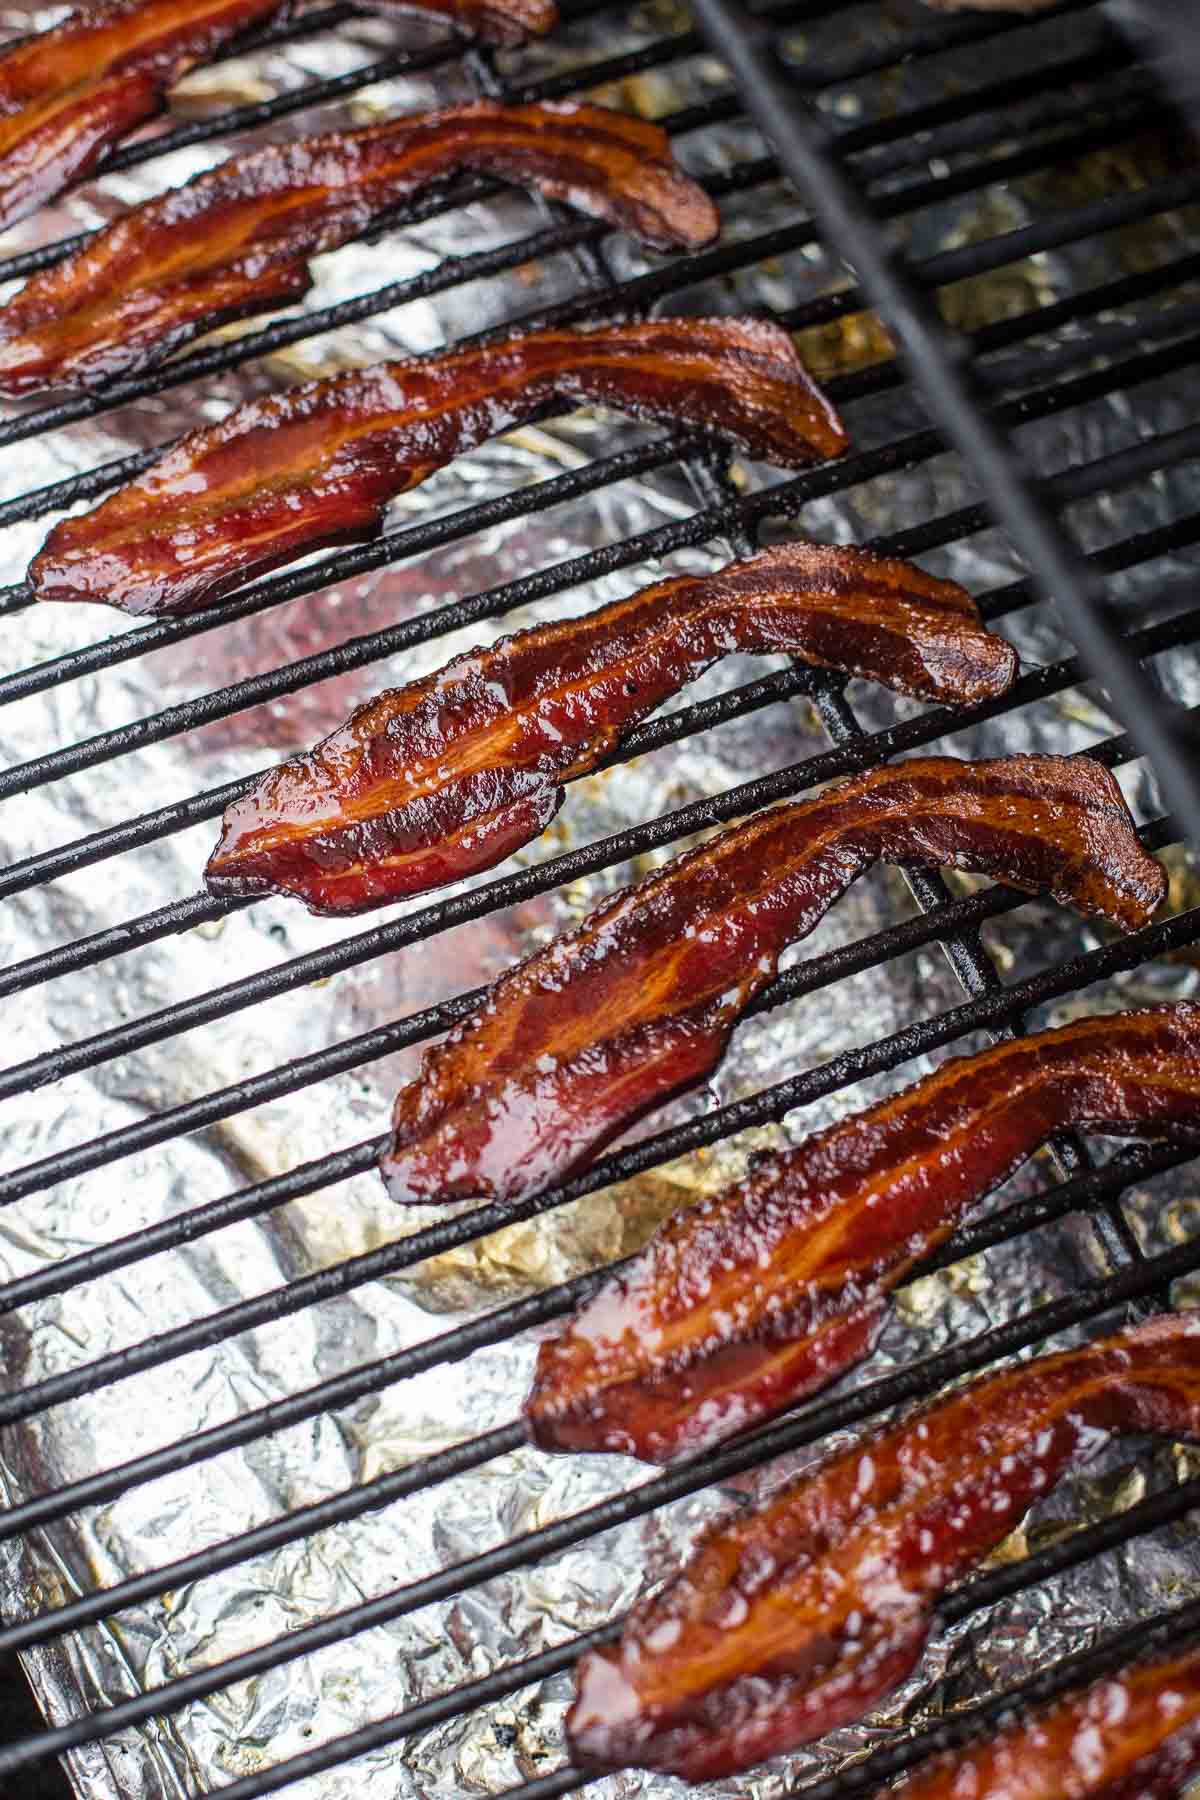 Smoking slices of Bacon on a smoker